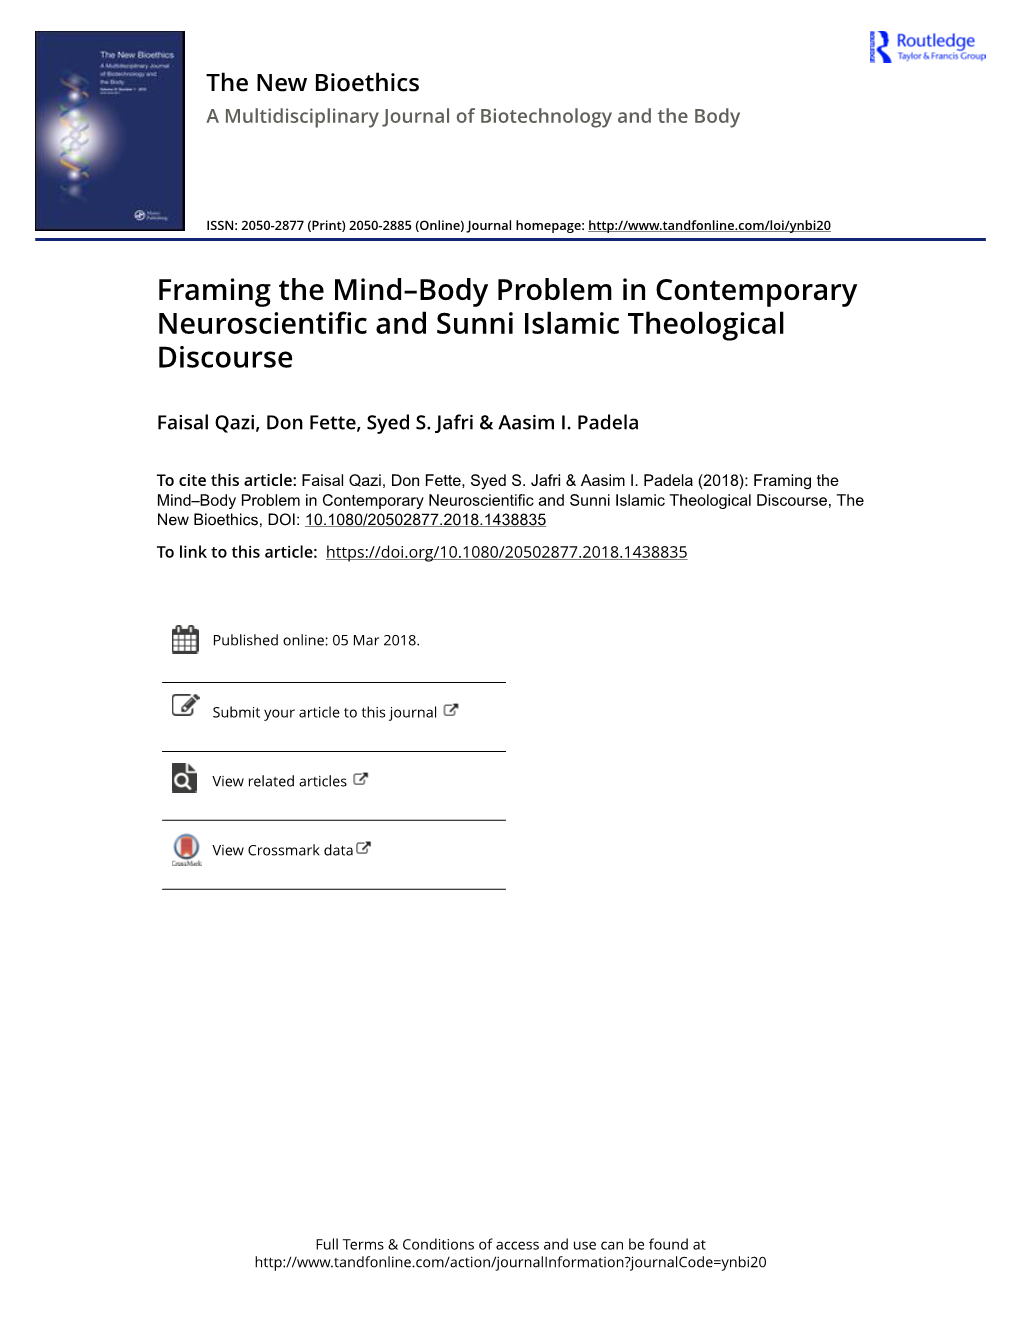 Framing the Mind–Body Problem in Contemporary Neuroscientific and Sunni Islamic Theological Discourse